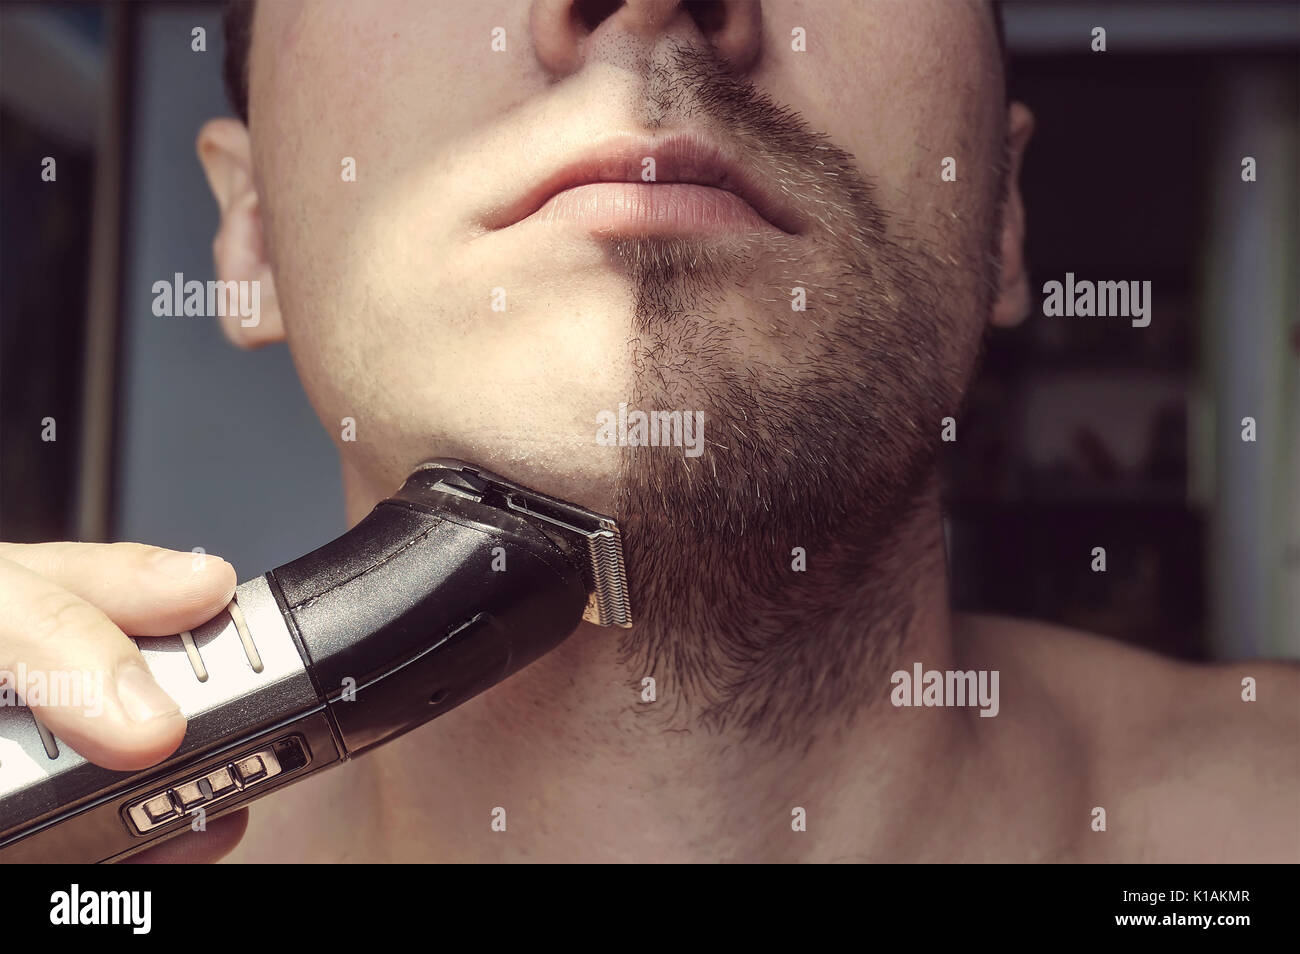 Young bearded man during grooming of beard using trimmer. Half face with a beard half shaved. Stock Photo